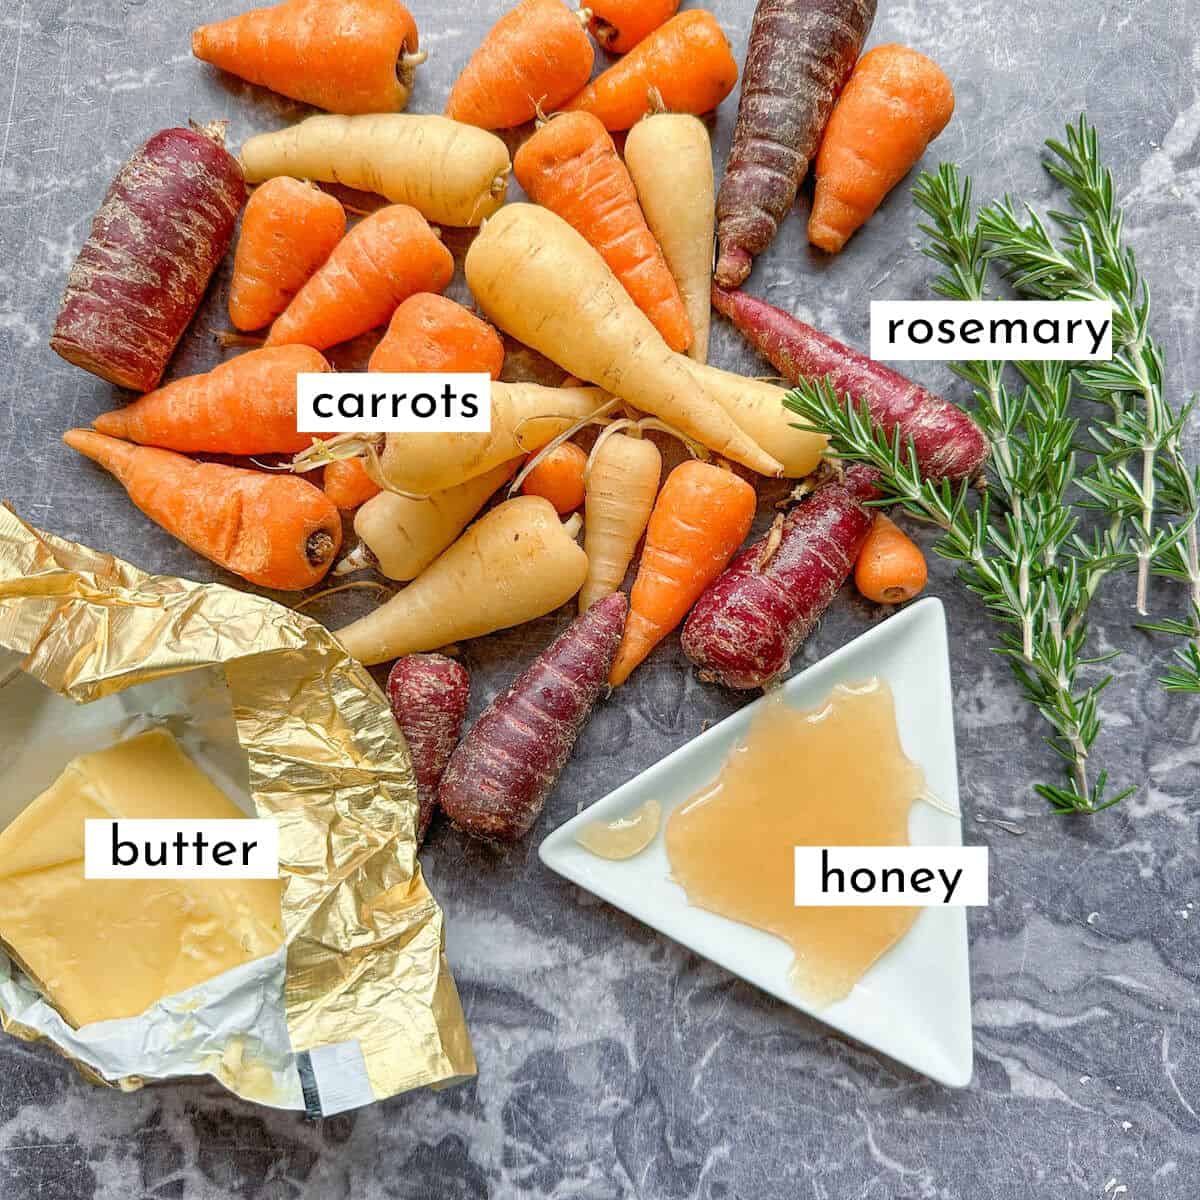 Ingredients for roasted hasselback carrots on a kitchen worktop. Carrots, rosemary, honey and butter. 